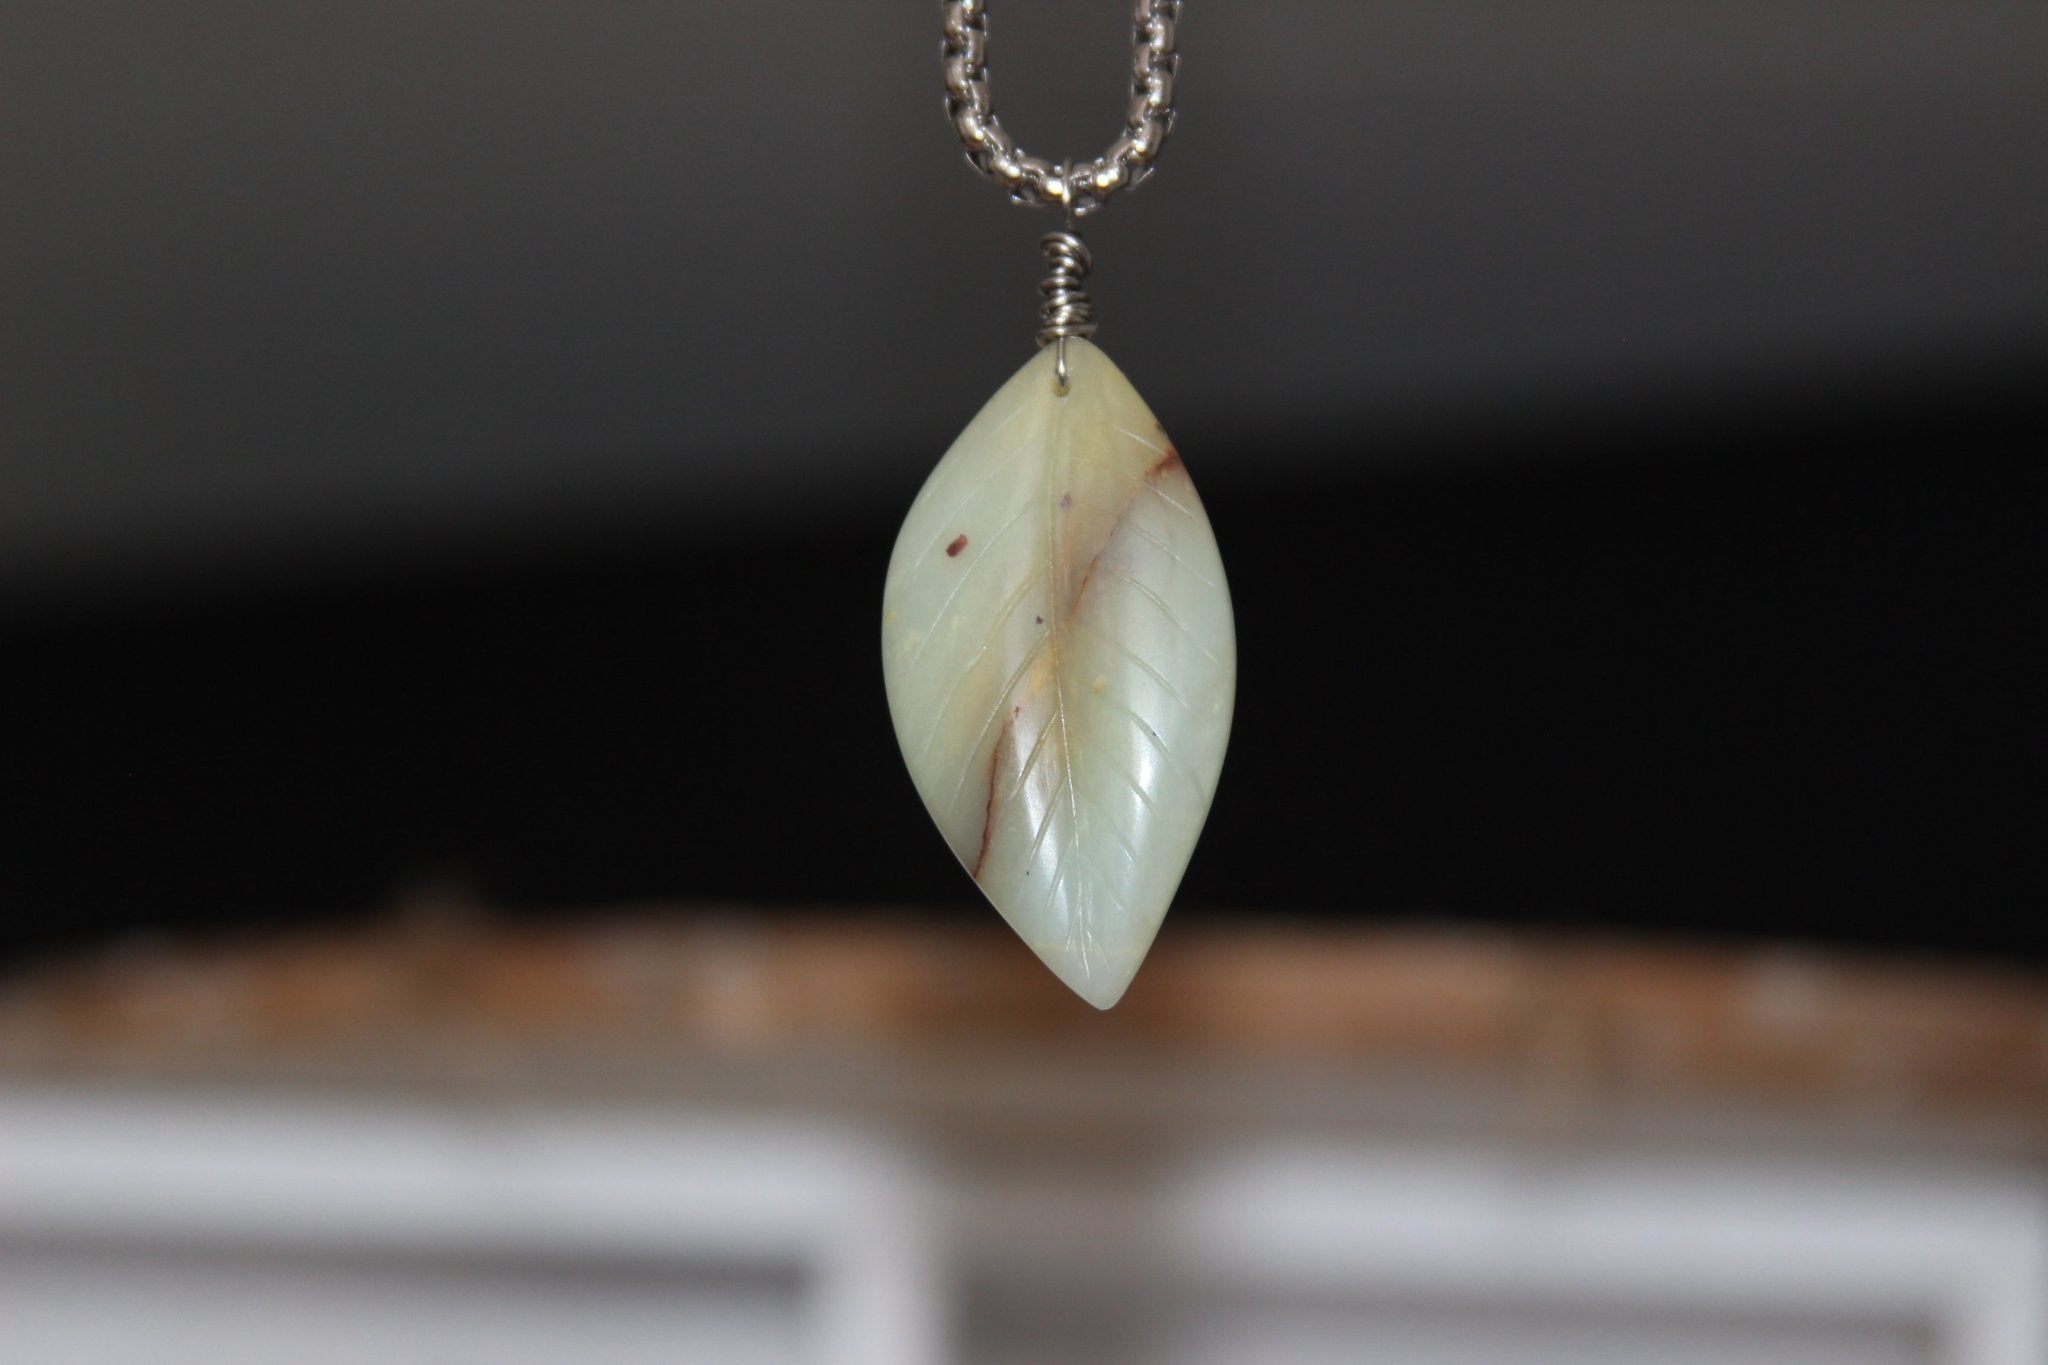 Amazonite Crystal Leaf Necklace - We Love Brass